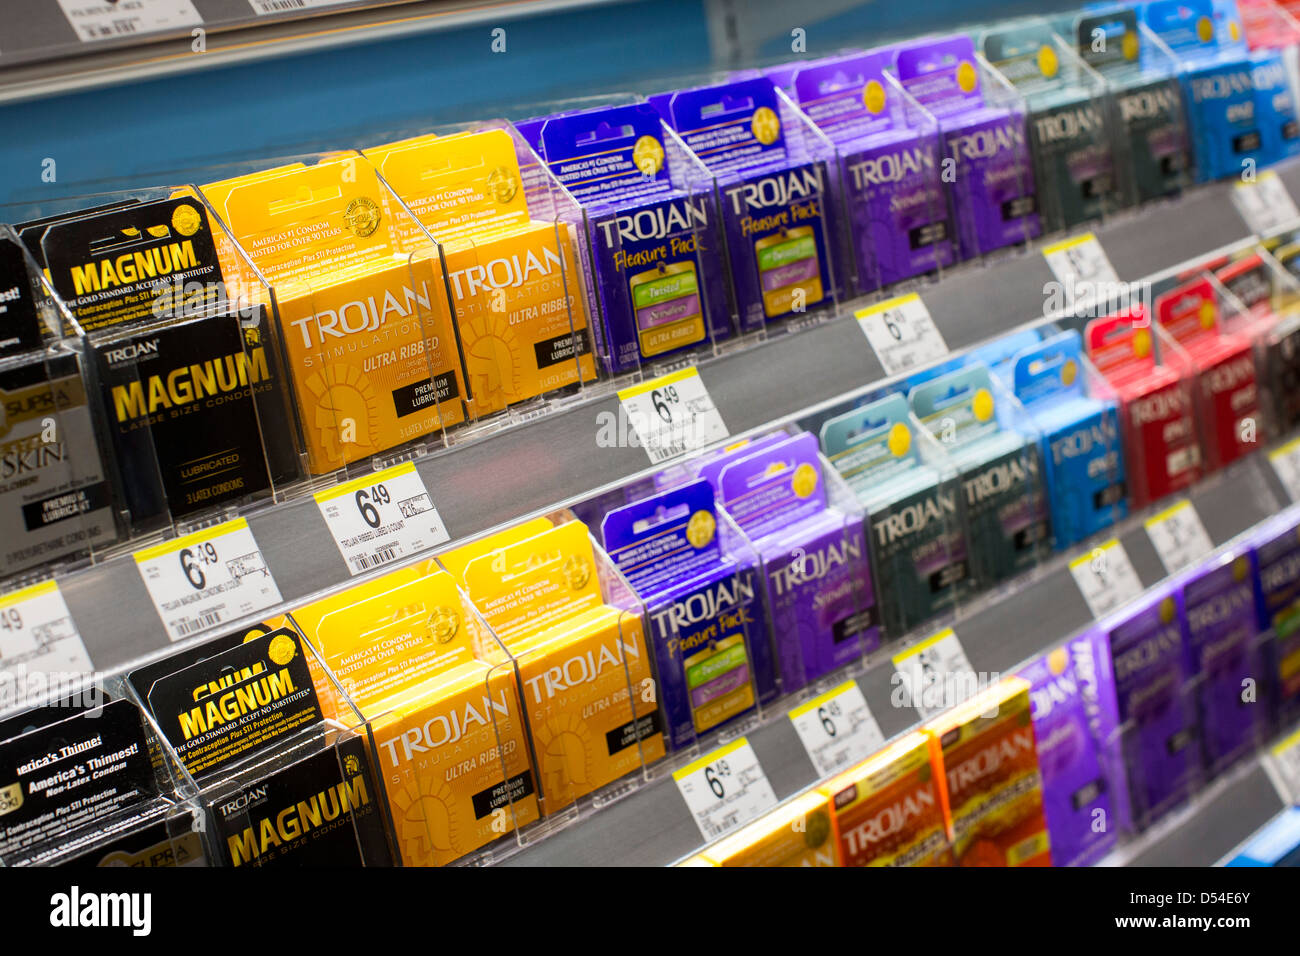 Trojan condom products on display at a Walgreens Flagship store.  Stock Photo